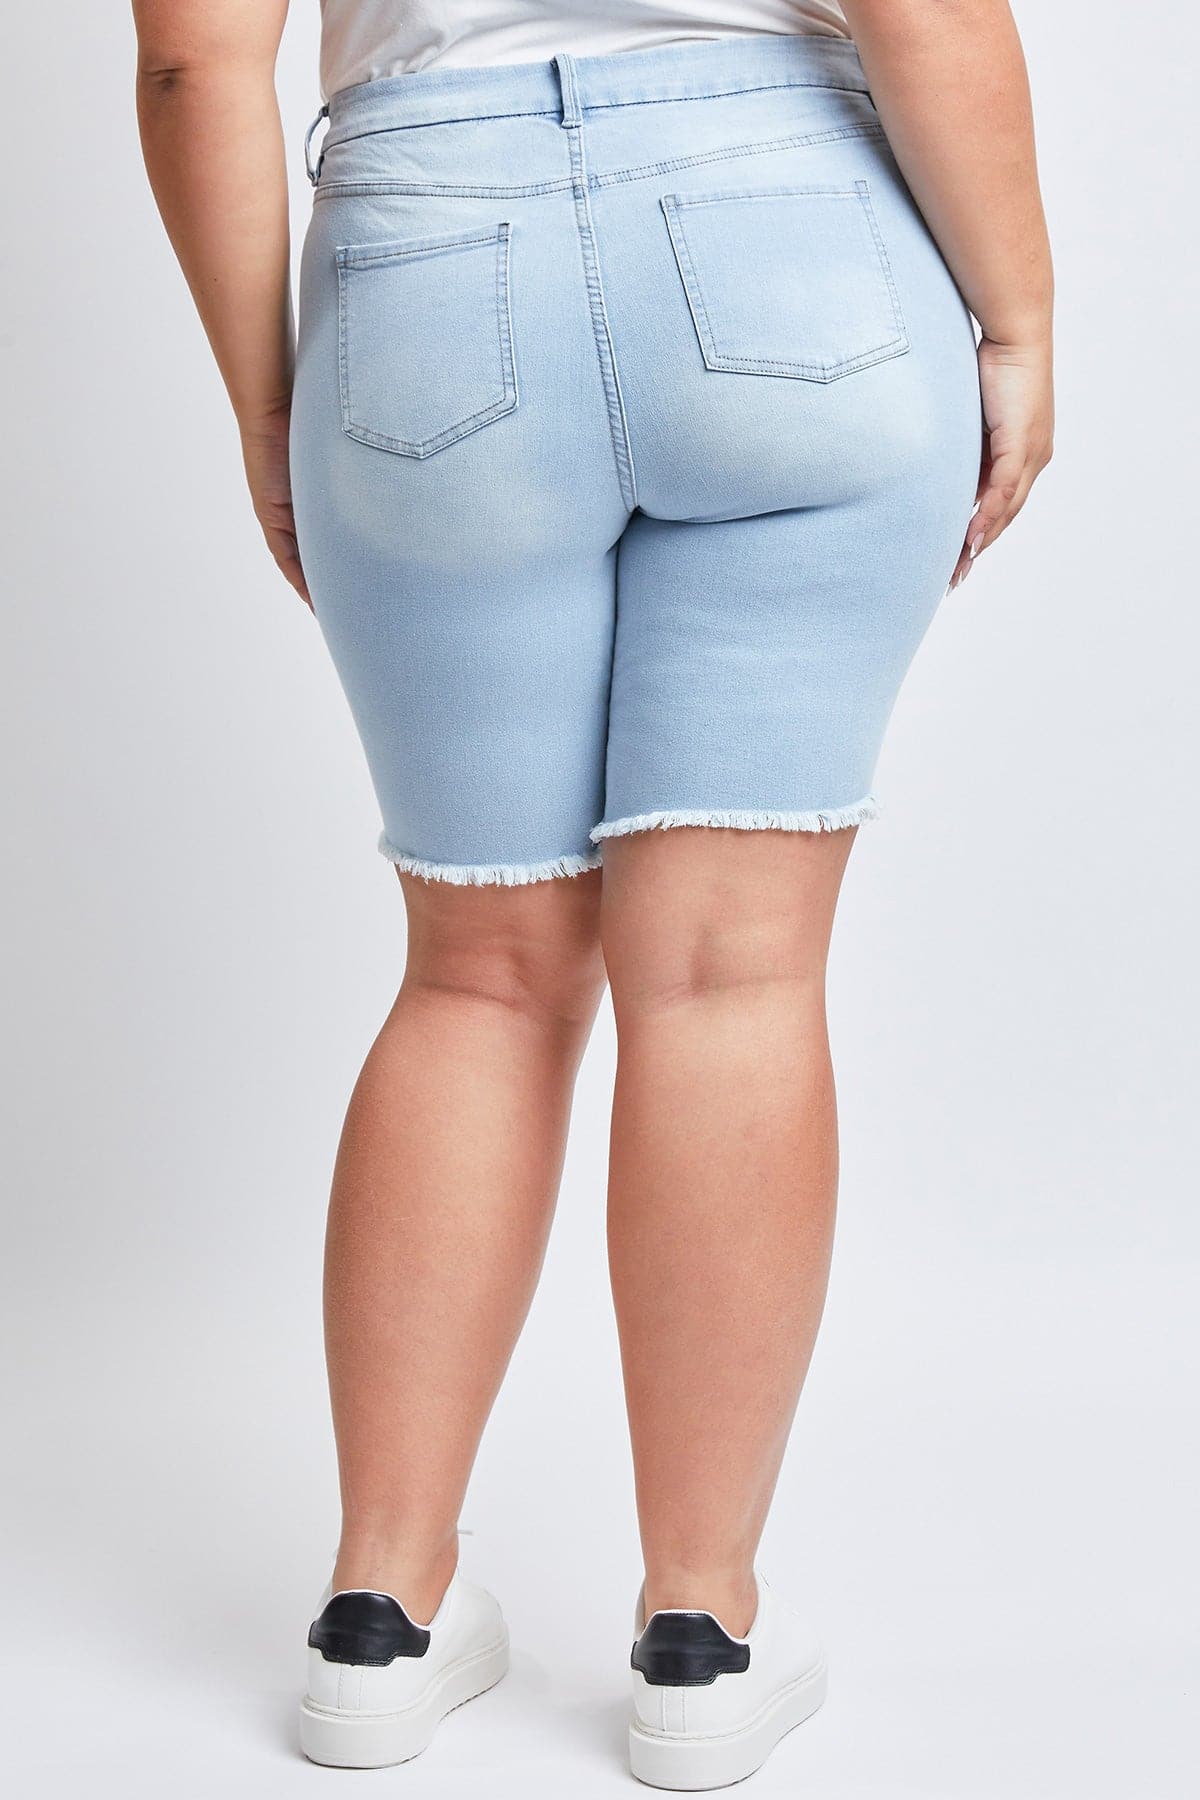 Plus Size Women's Curvy Fit  Bermuda Shorts With Fray-Sale